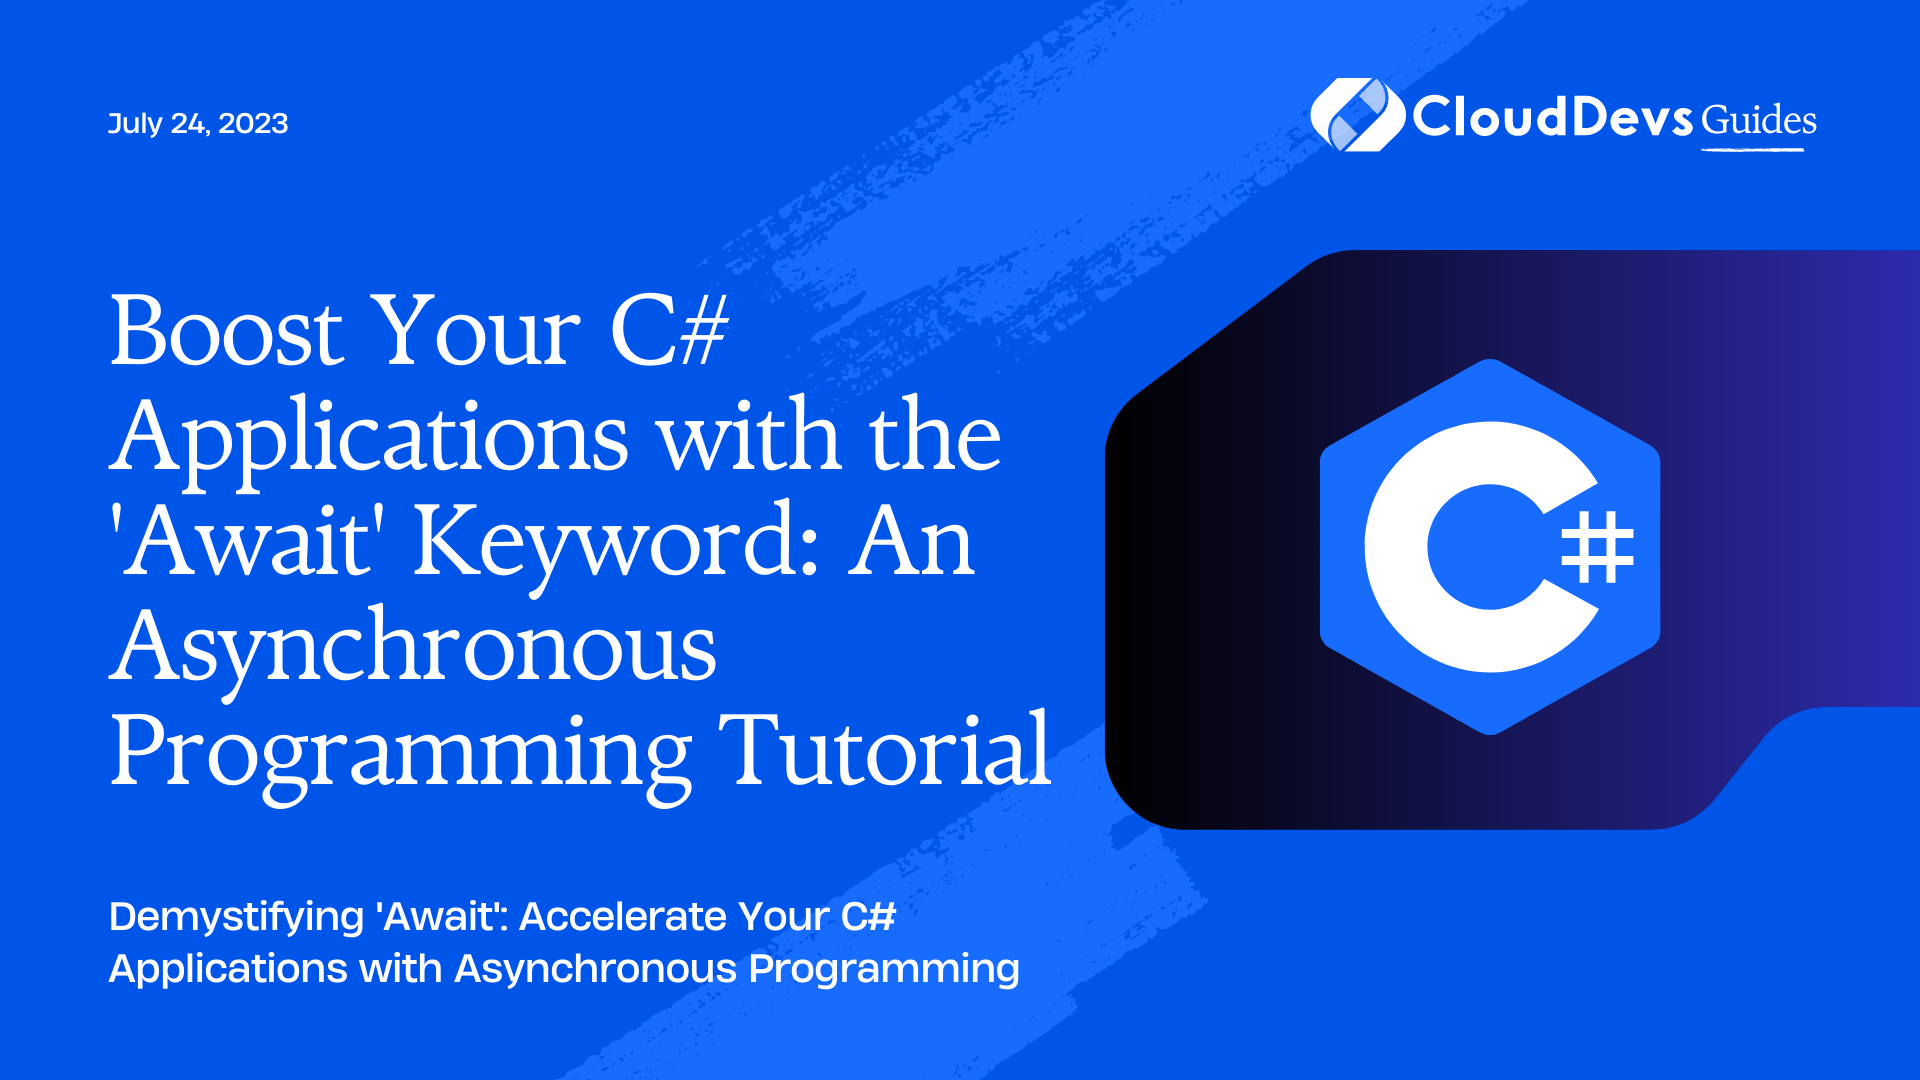 Boost Your C# Applications with the'Await' Keyword: An Asynchronous Programming Tutorial